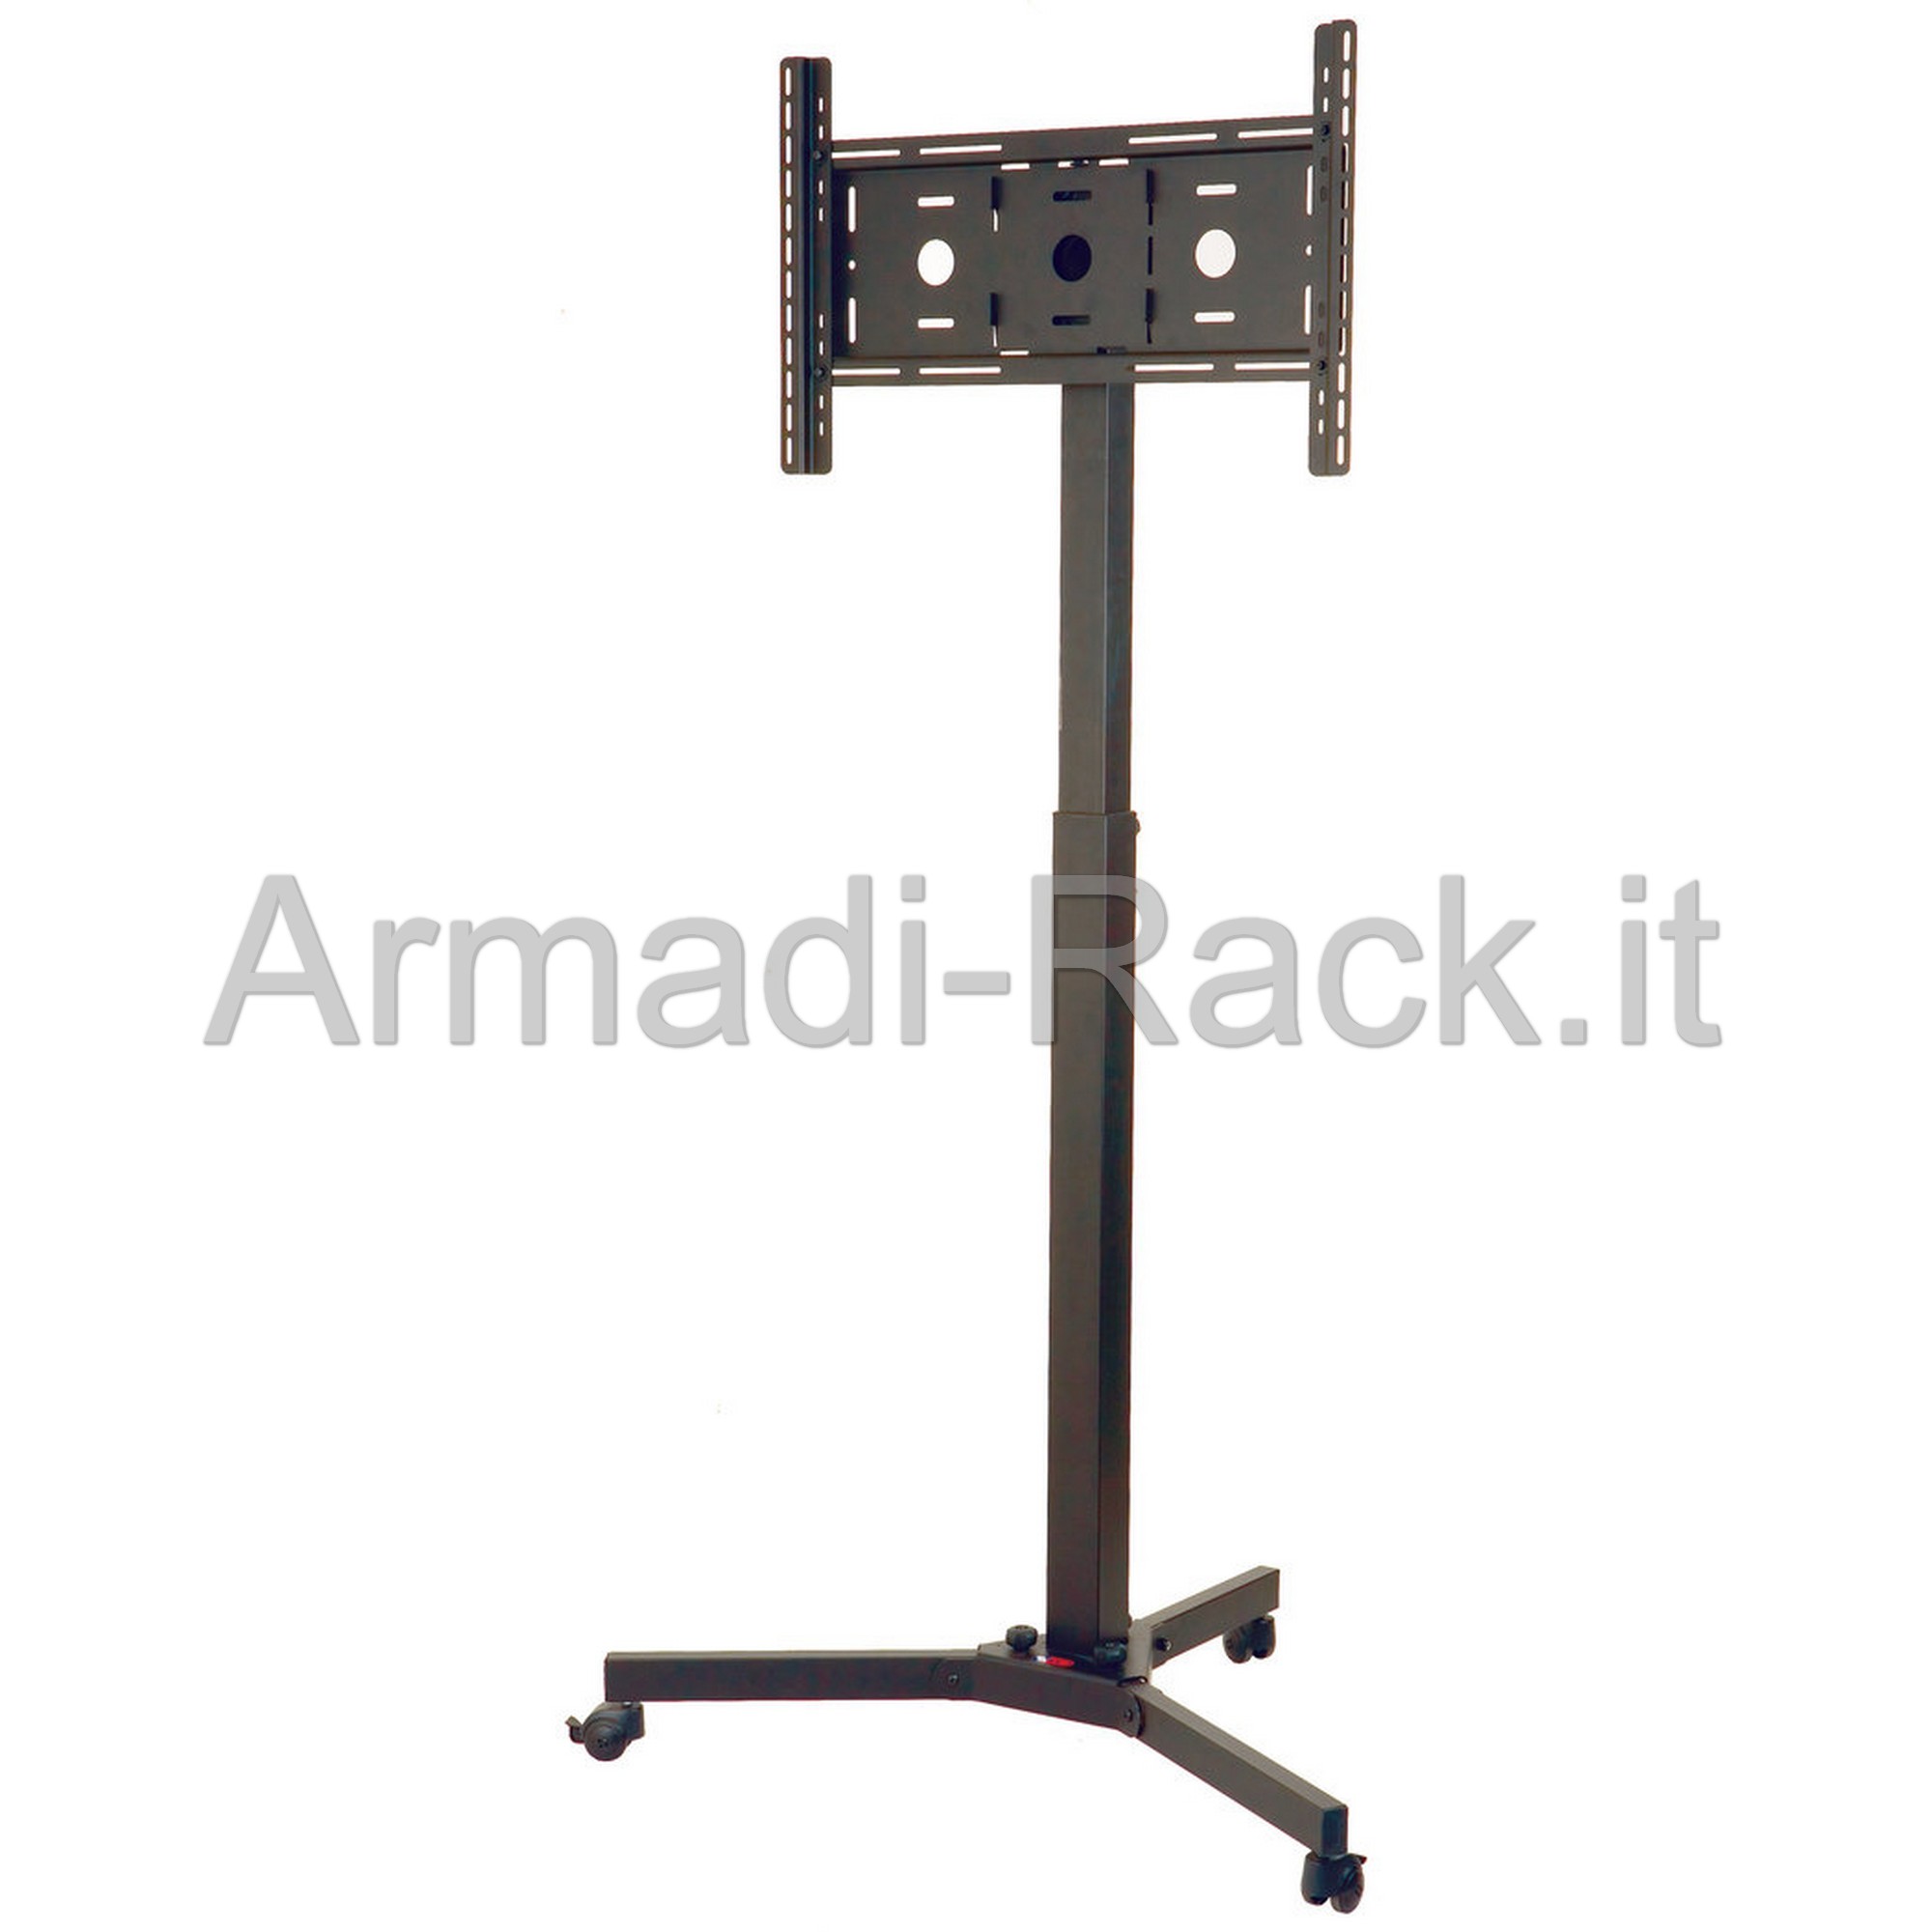 Floor stand for monitors and LCD TVs